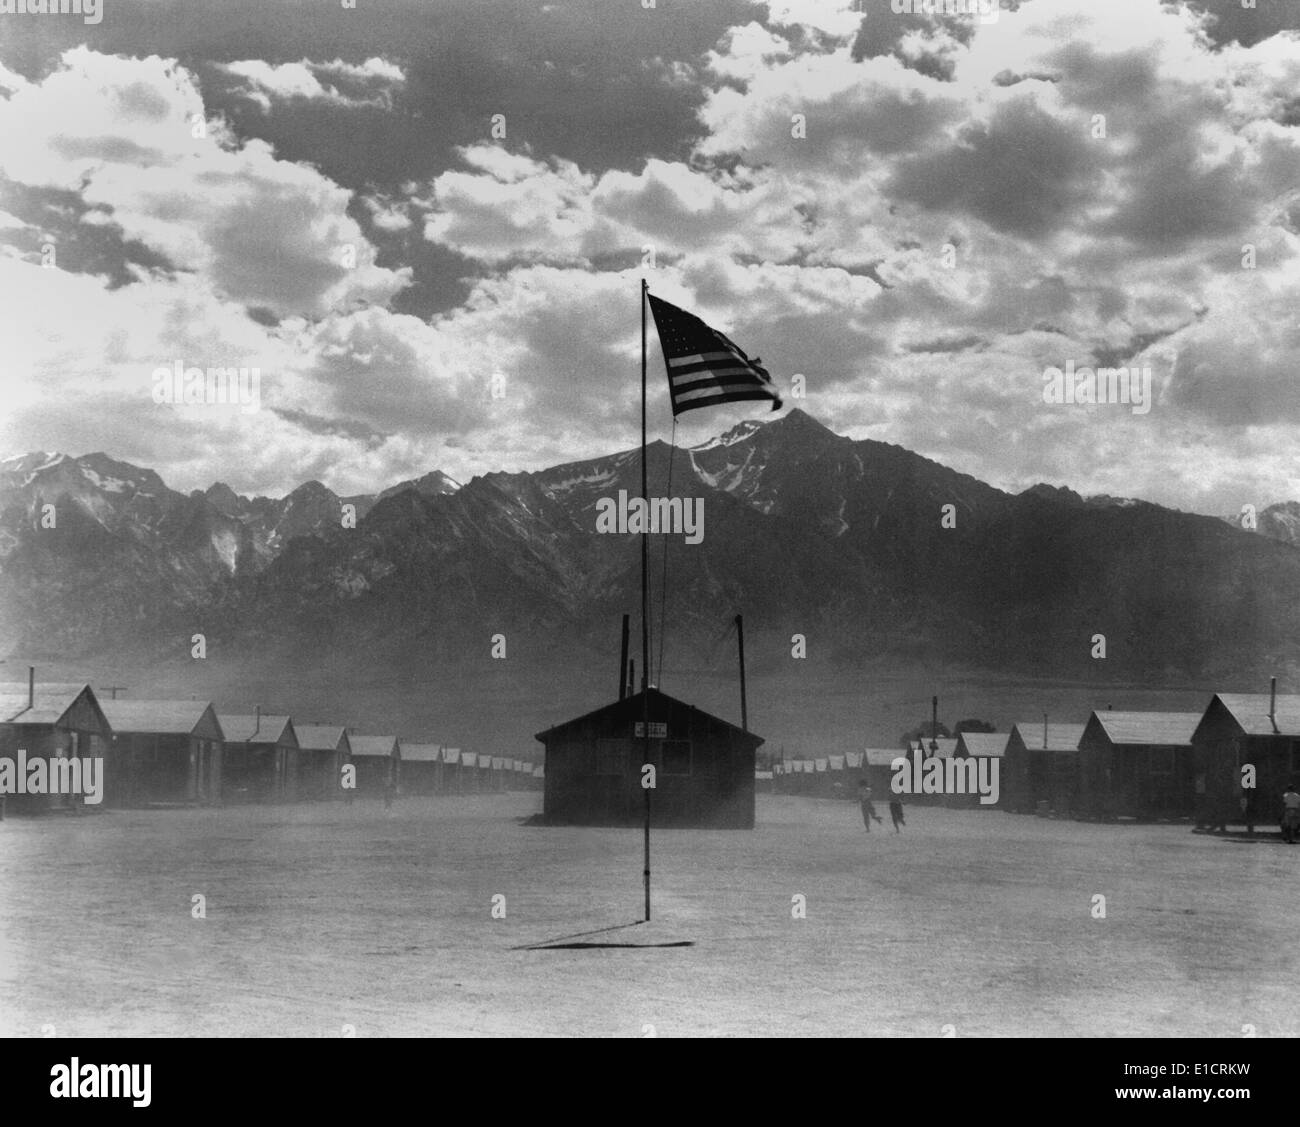 Dust storm at Manzanar internment camp for Japanese Americans for during World War 2. California, July 3, 1942. Photo by Stock Photo